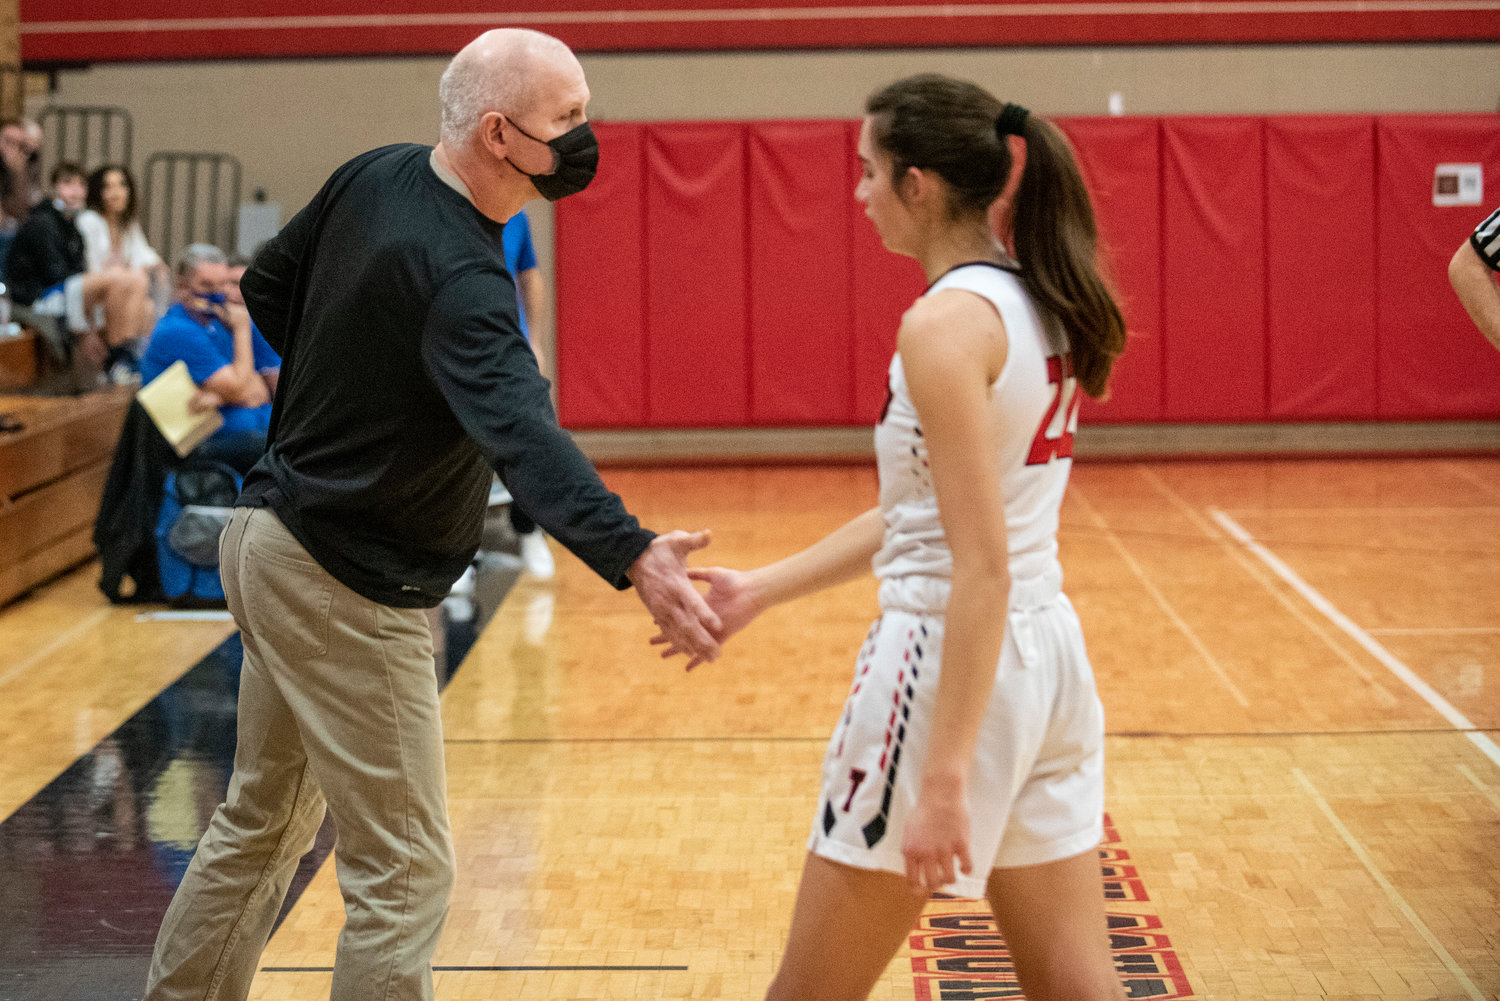 Tenino coach Scott Ashmore high-fives Ashley Schow during a home game against Adna on Dec. 14.